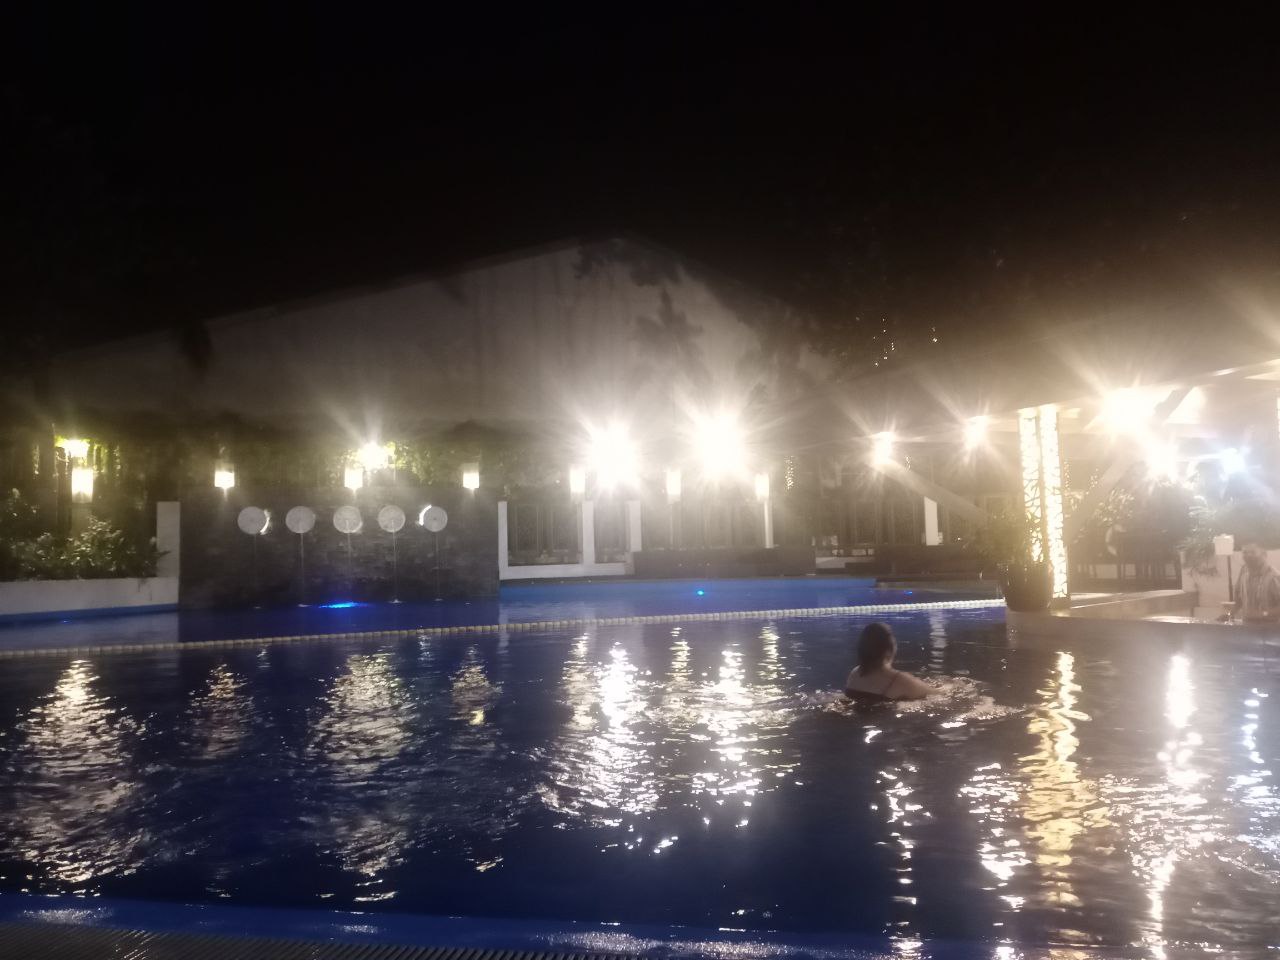 The Manila Hotel swimming pool at night, with the author swimming